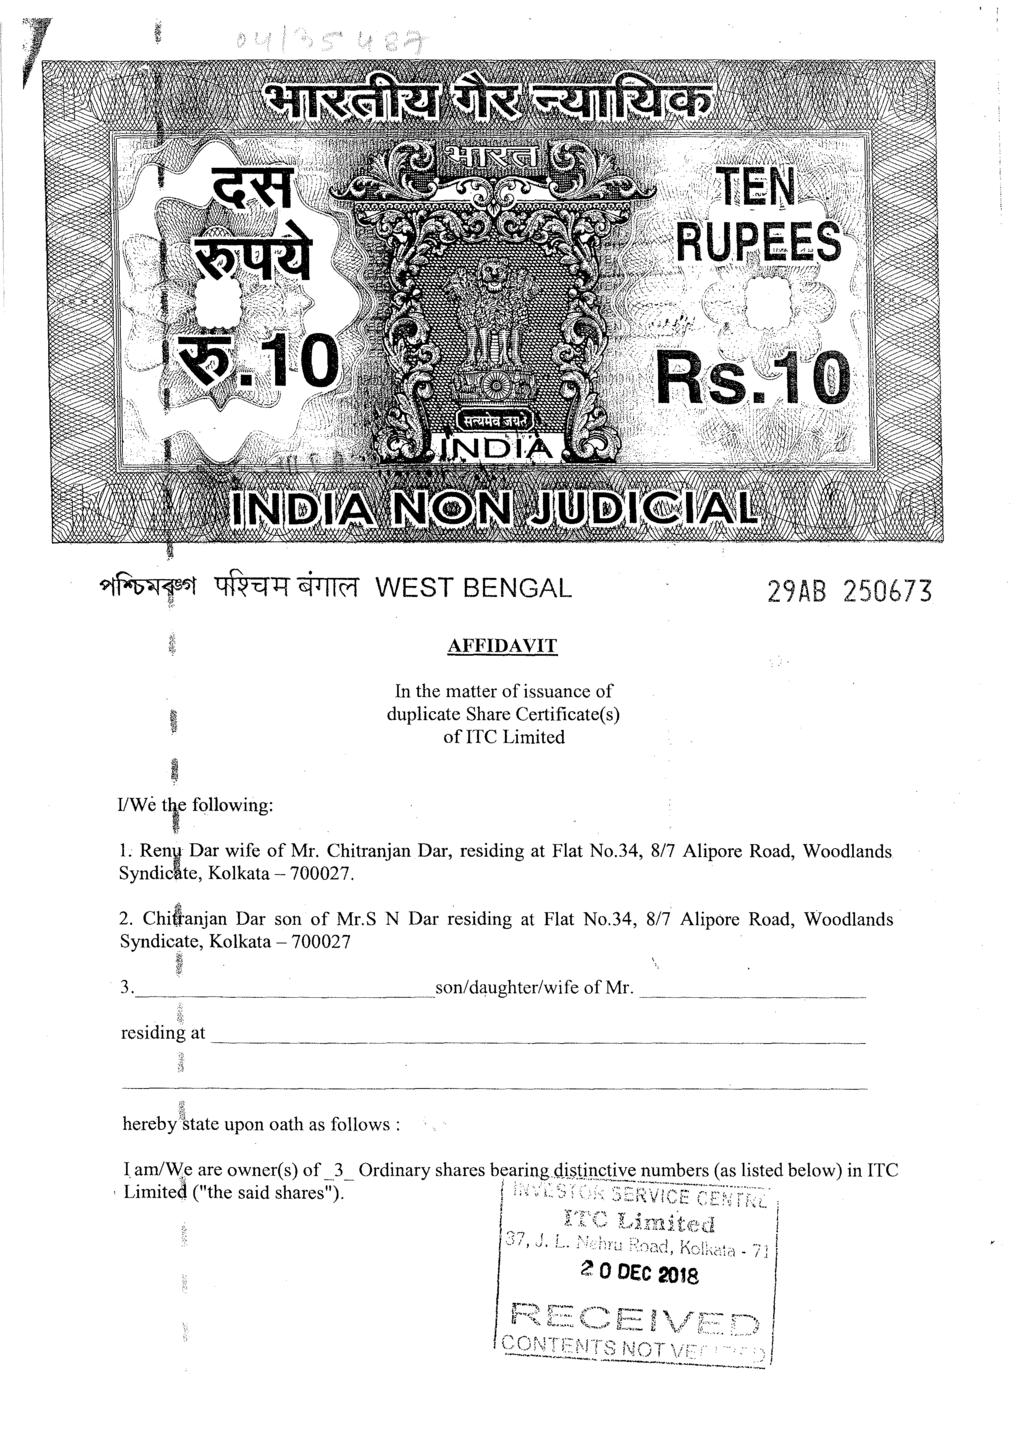 29AB 250673 ' VWe tlle following: I. AFFIDAVIT In the matter of issuance of duplicate Share Certificate( s) of ITC Limited 1. Re.ny Dar wife of Mr. Chitranjan Dar, residing at Flat No.